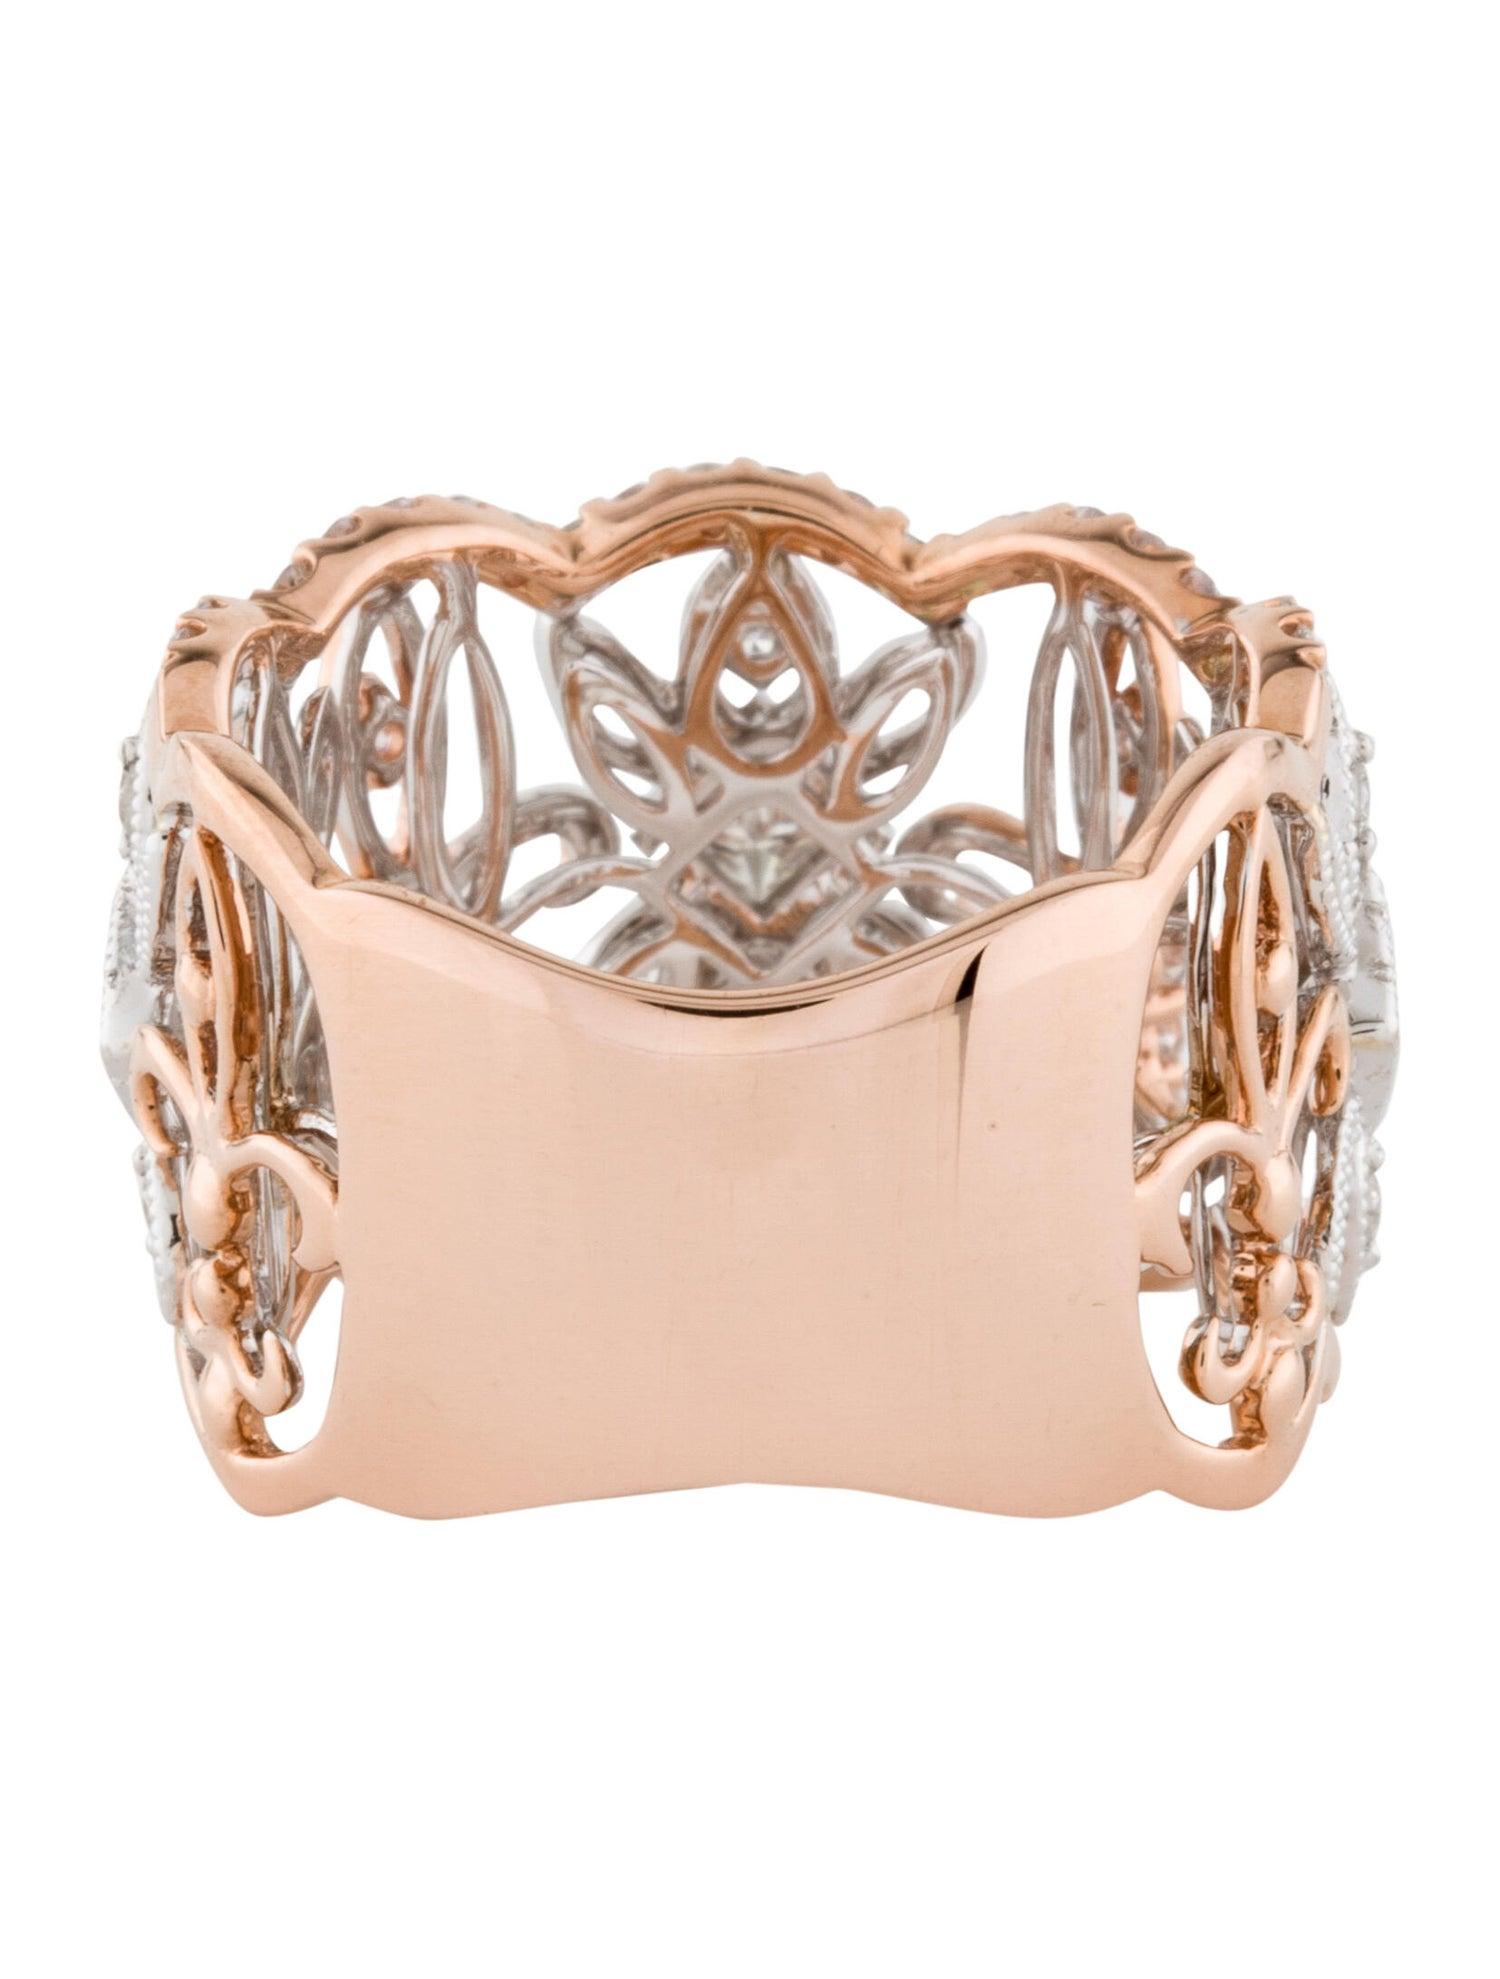 Contemporary 14kt White Gold and 14kt Rose Gold 0.80ct Diamond Fleur-De-Lis Band For Sale